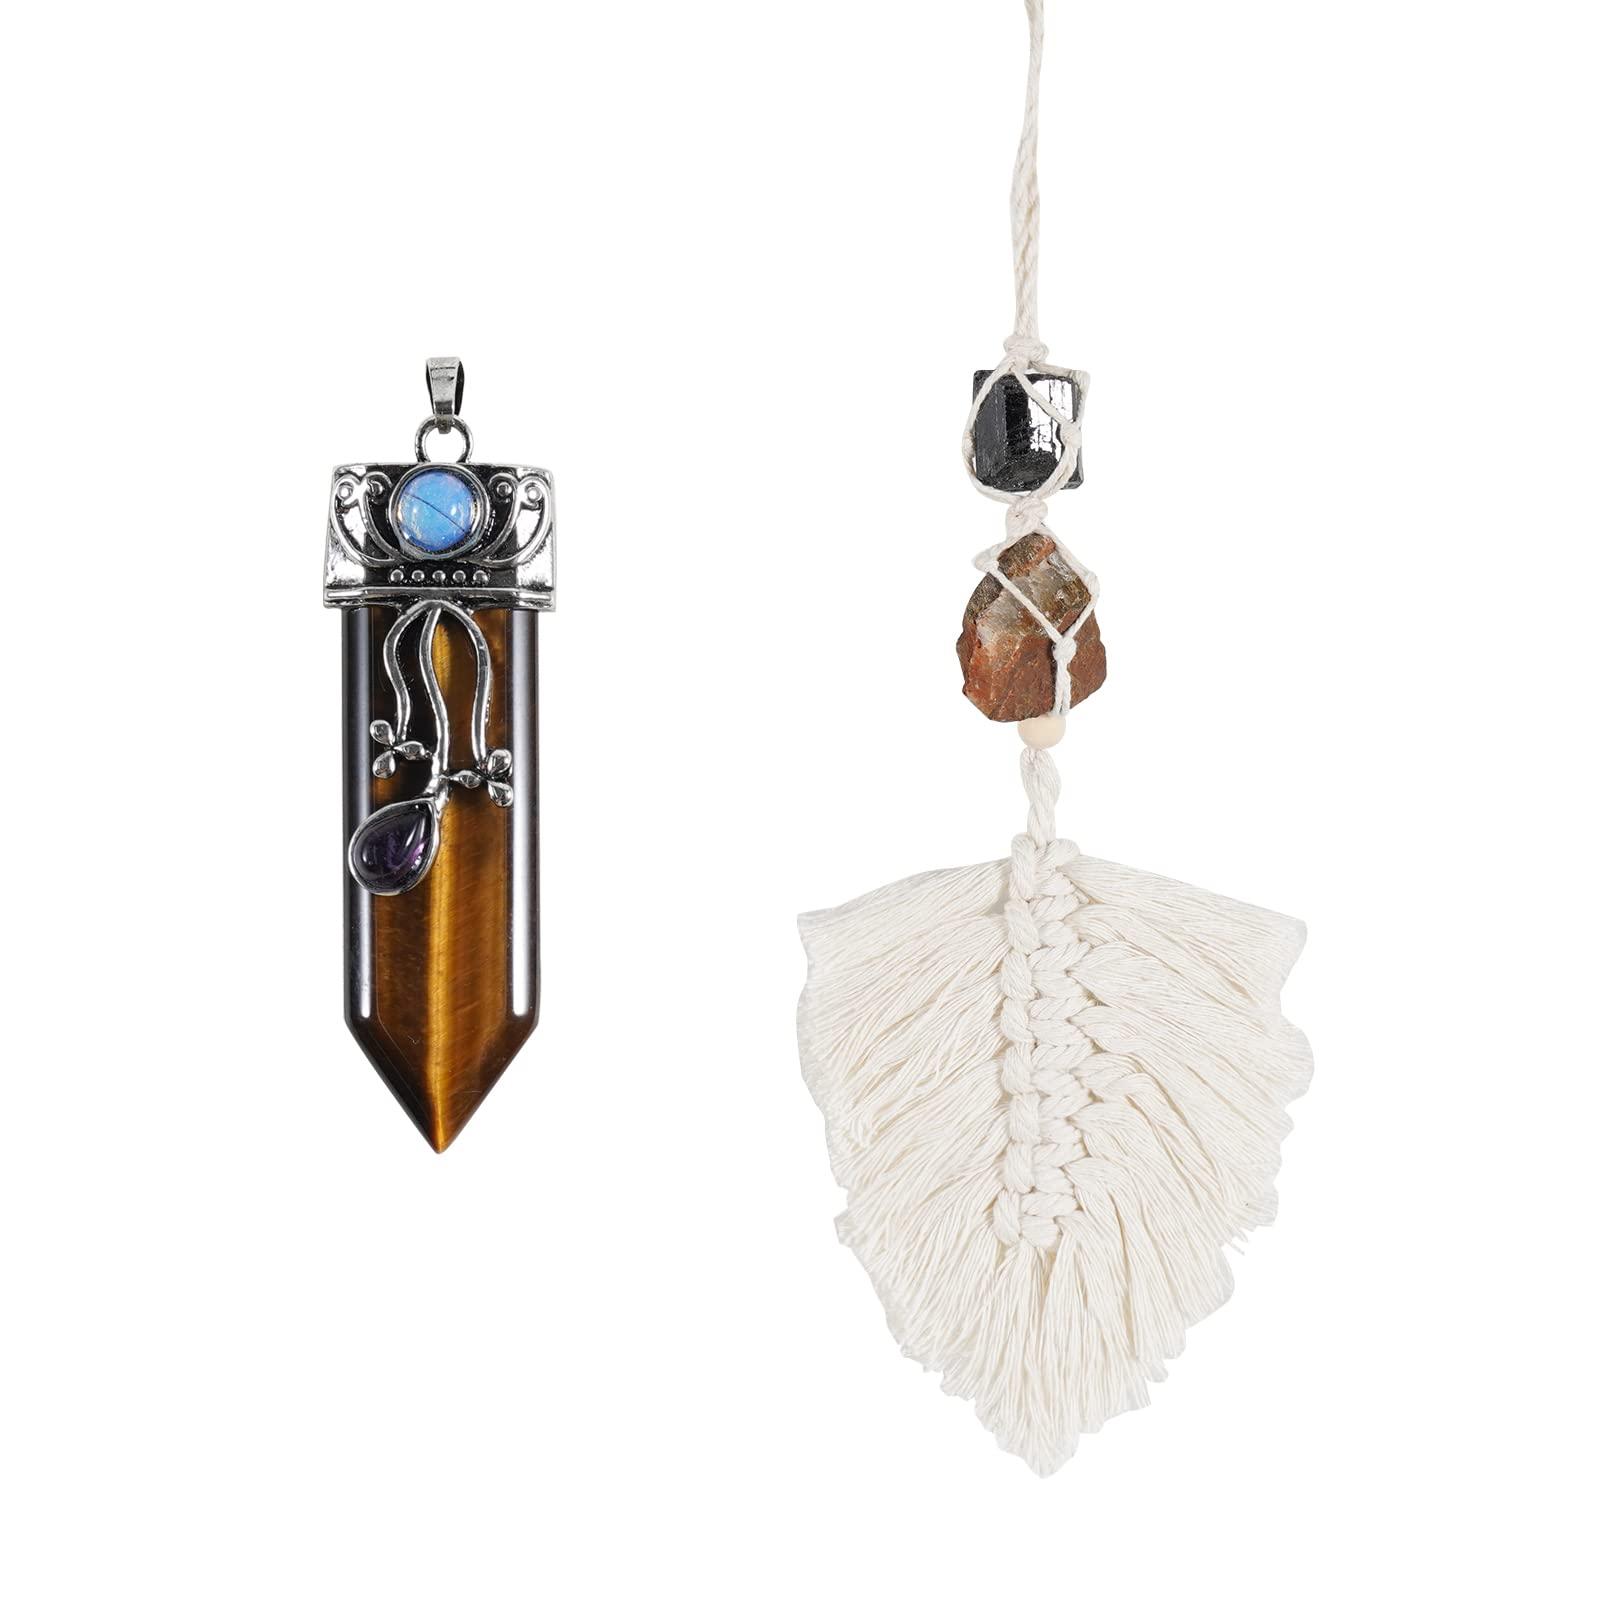 Soulnioi Irregular Raw Stone Hanging Ornaments Hand-Woven Leaf-Shaped Tassel - Black Tourmaline & Tiger Eye Stone, for Car Rear View Mirrors Home Decor, and Crystal Tiger Eye Stone Necklace Pendant